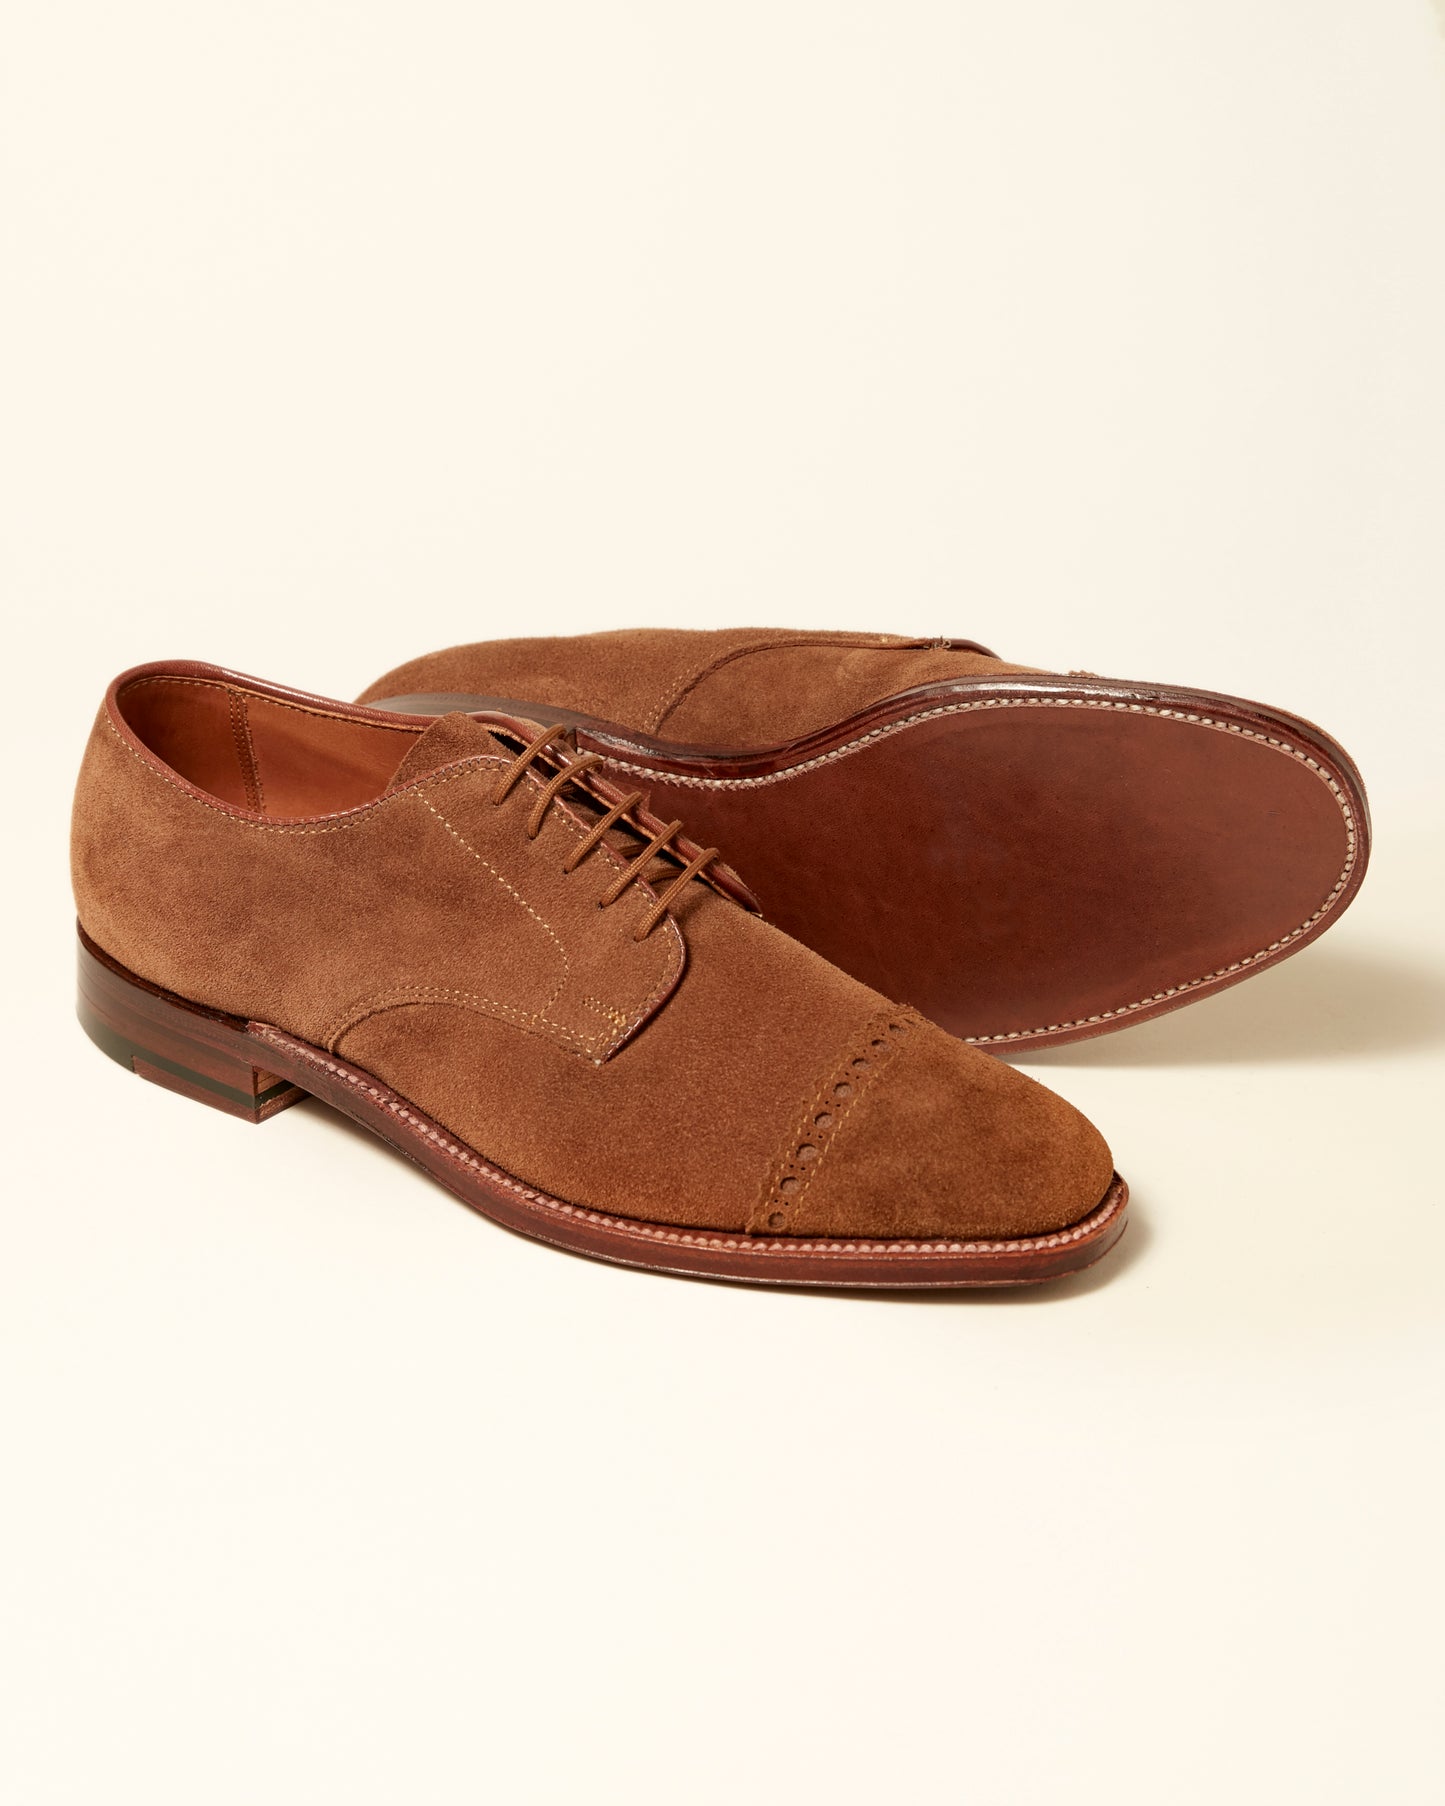 "Ambassador" Unlined Perforated Tip Blucher in Snuff Suede, Plaza Last